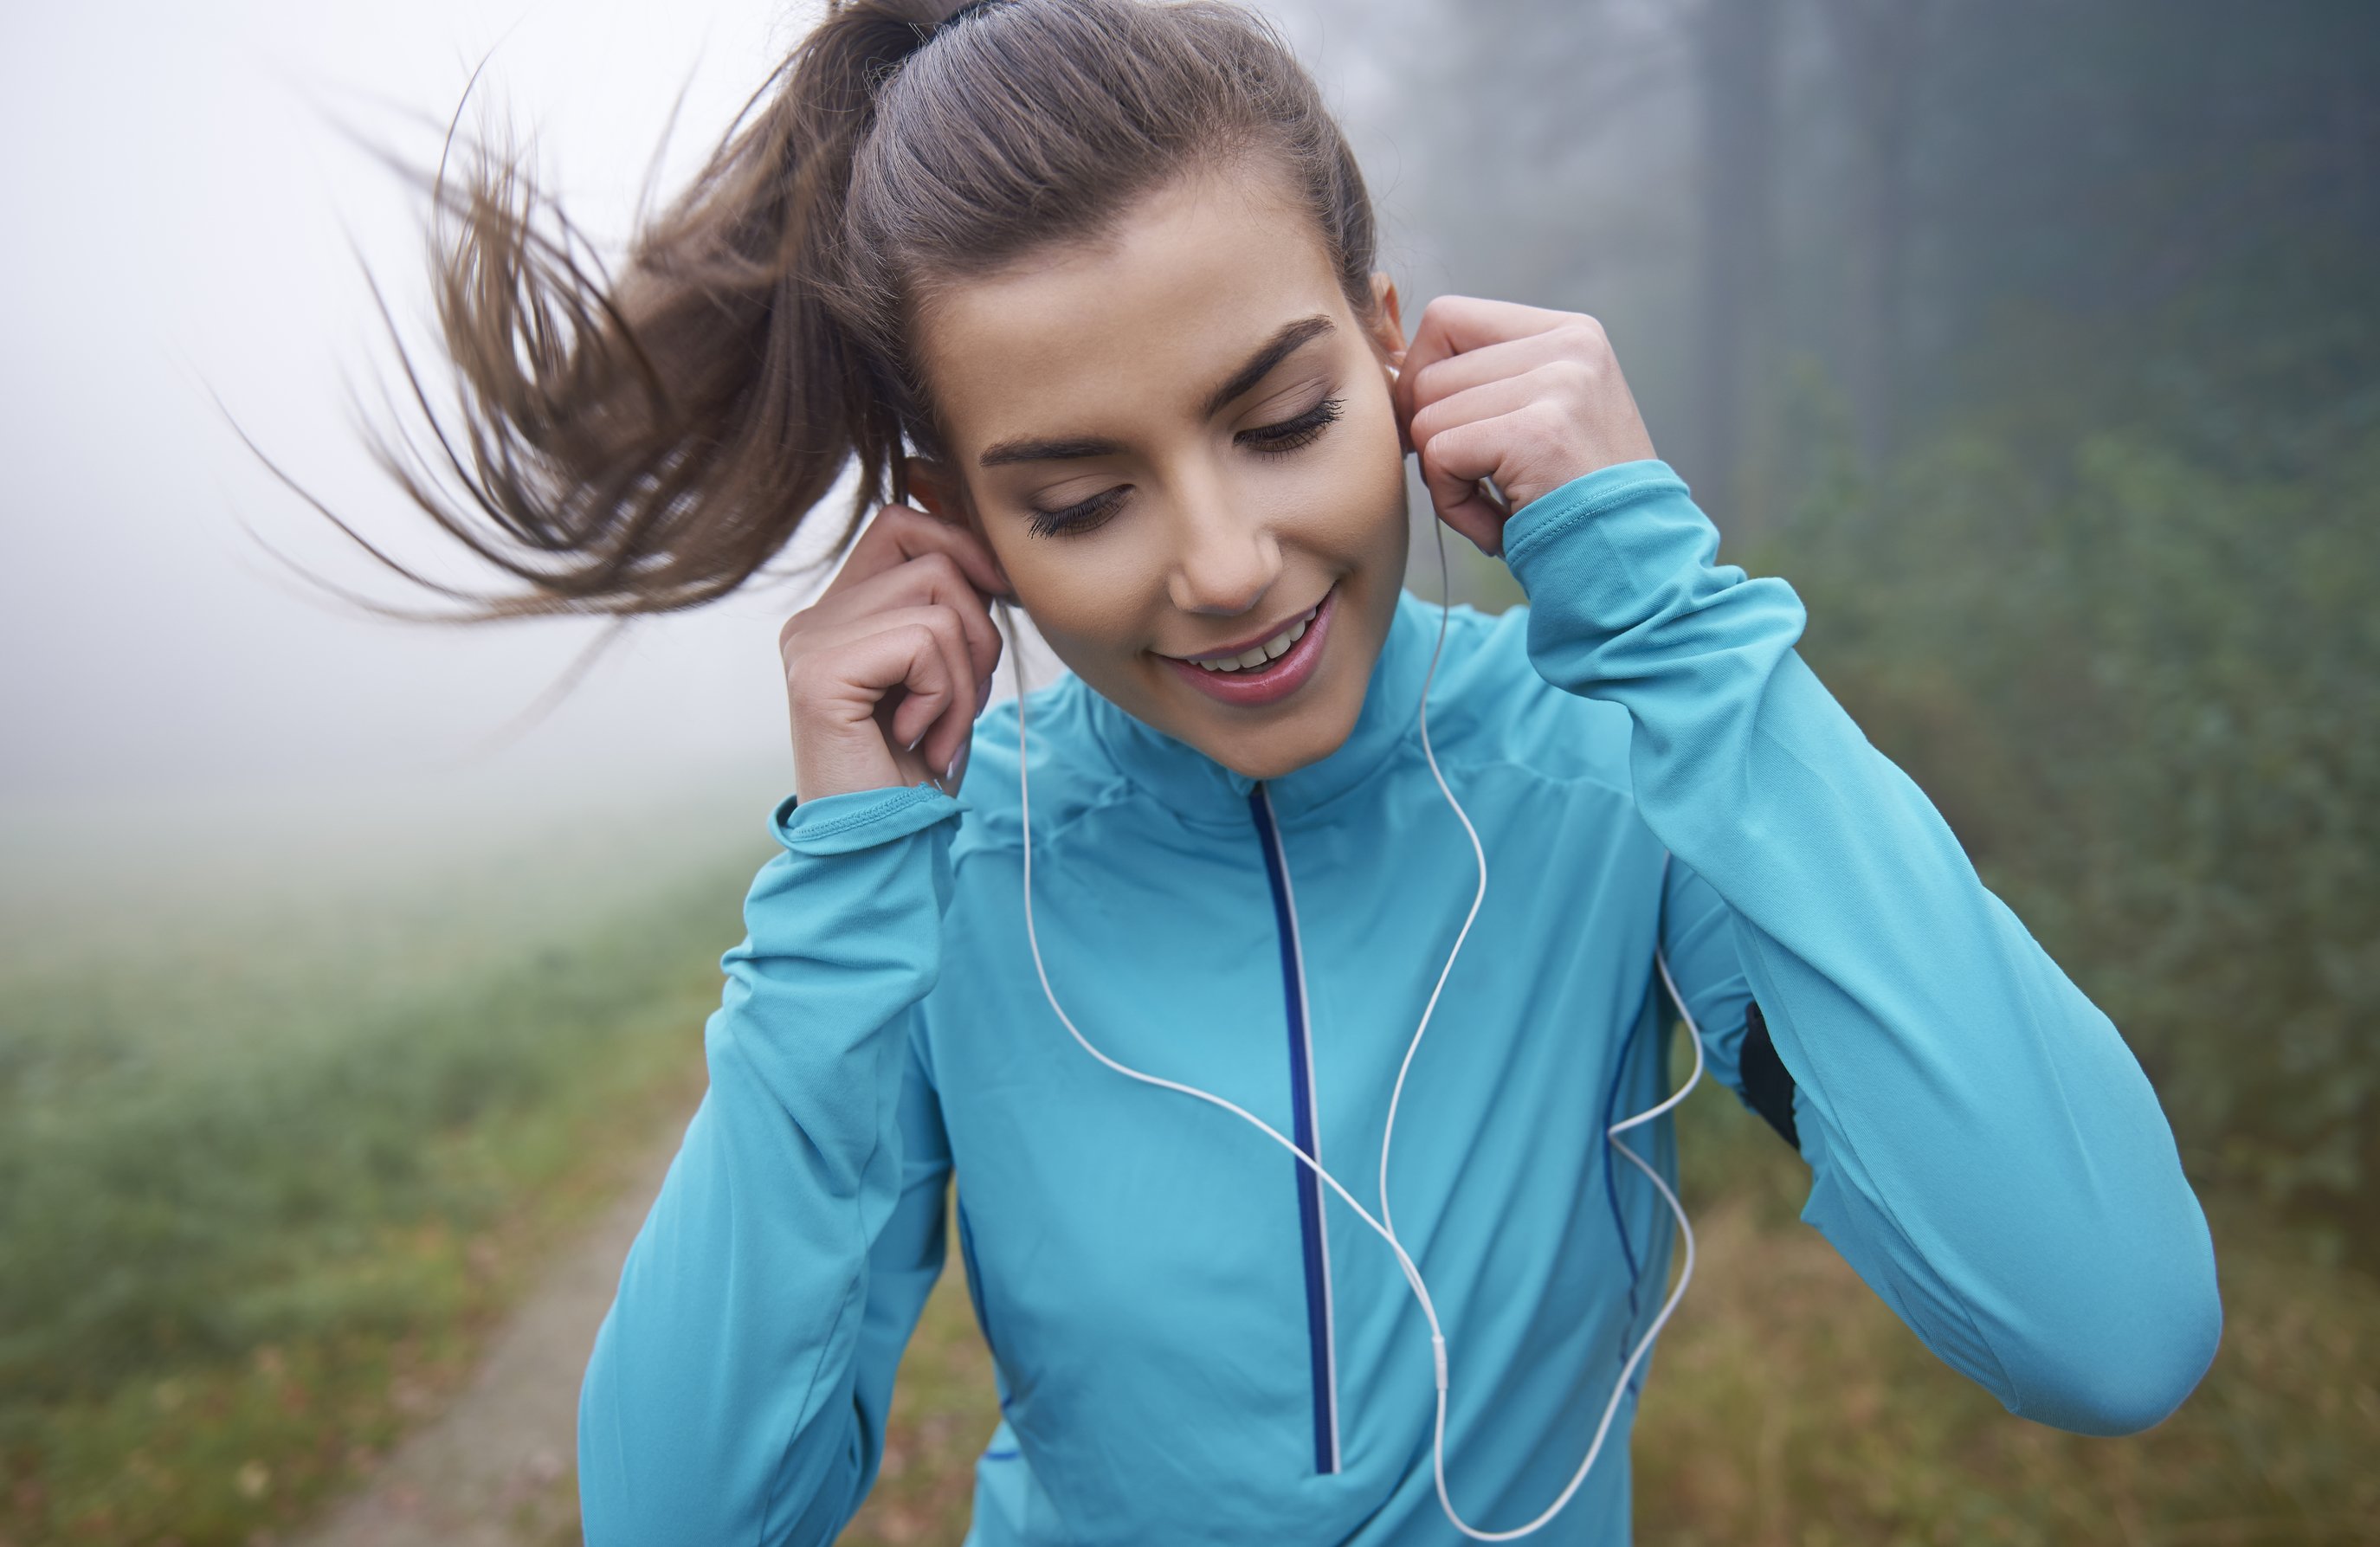 The Top 100 Workout Songs